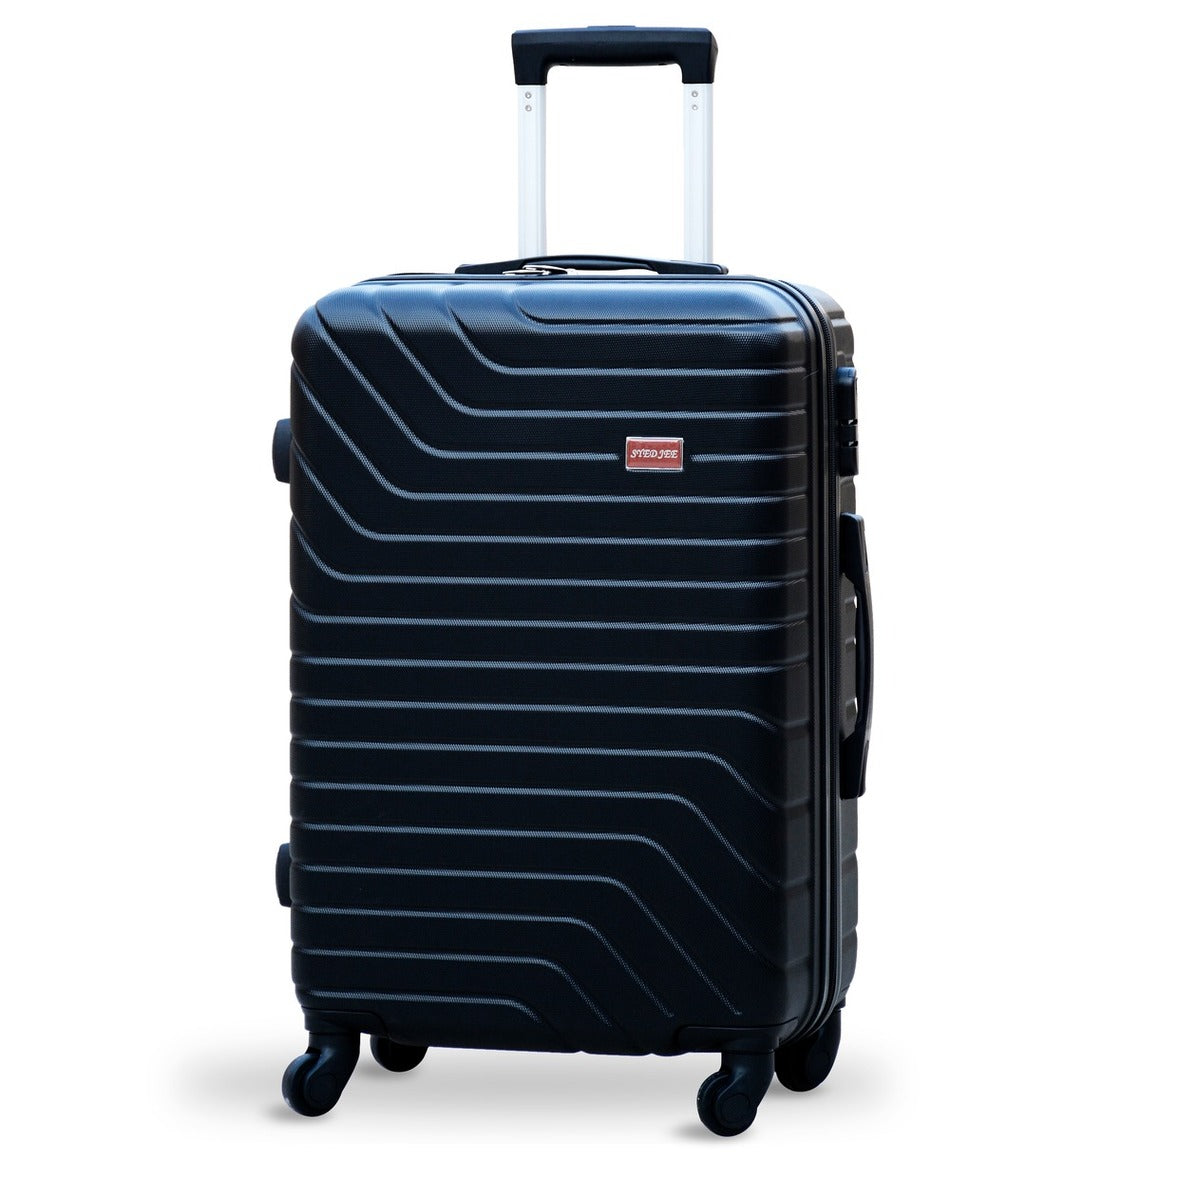 4 Piece Full Set 20" 24" 28" 32 Inches Black Colour SJ ABS Luggage Lightweight Hard Case Trolley Bag Zaappy.com